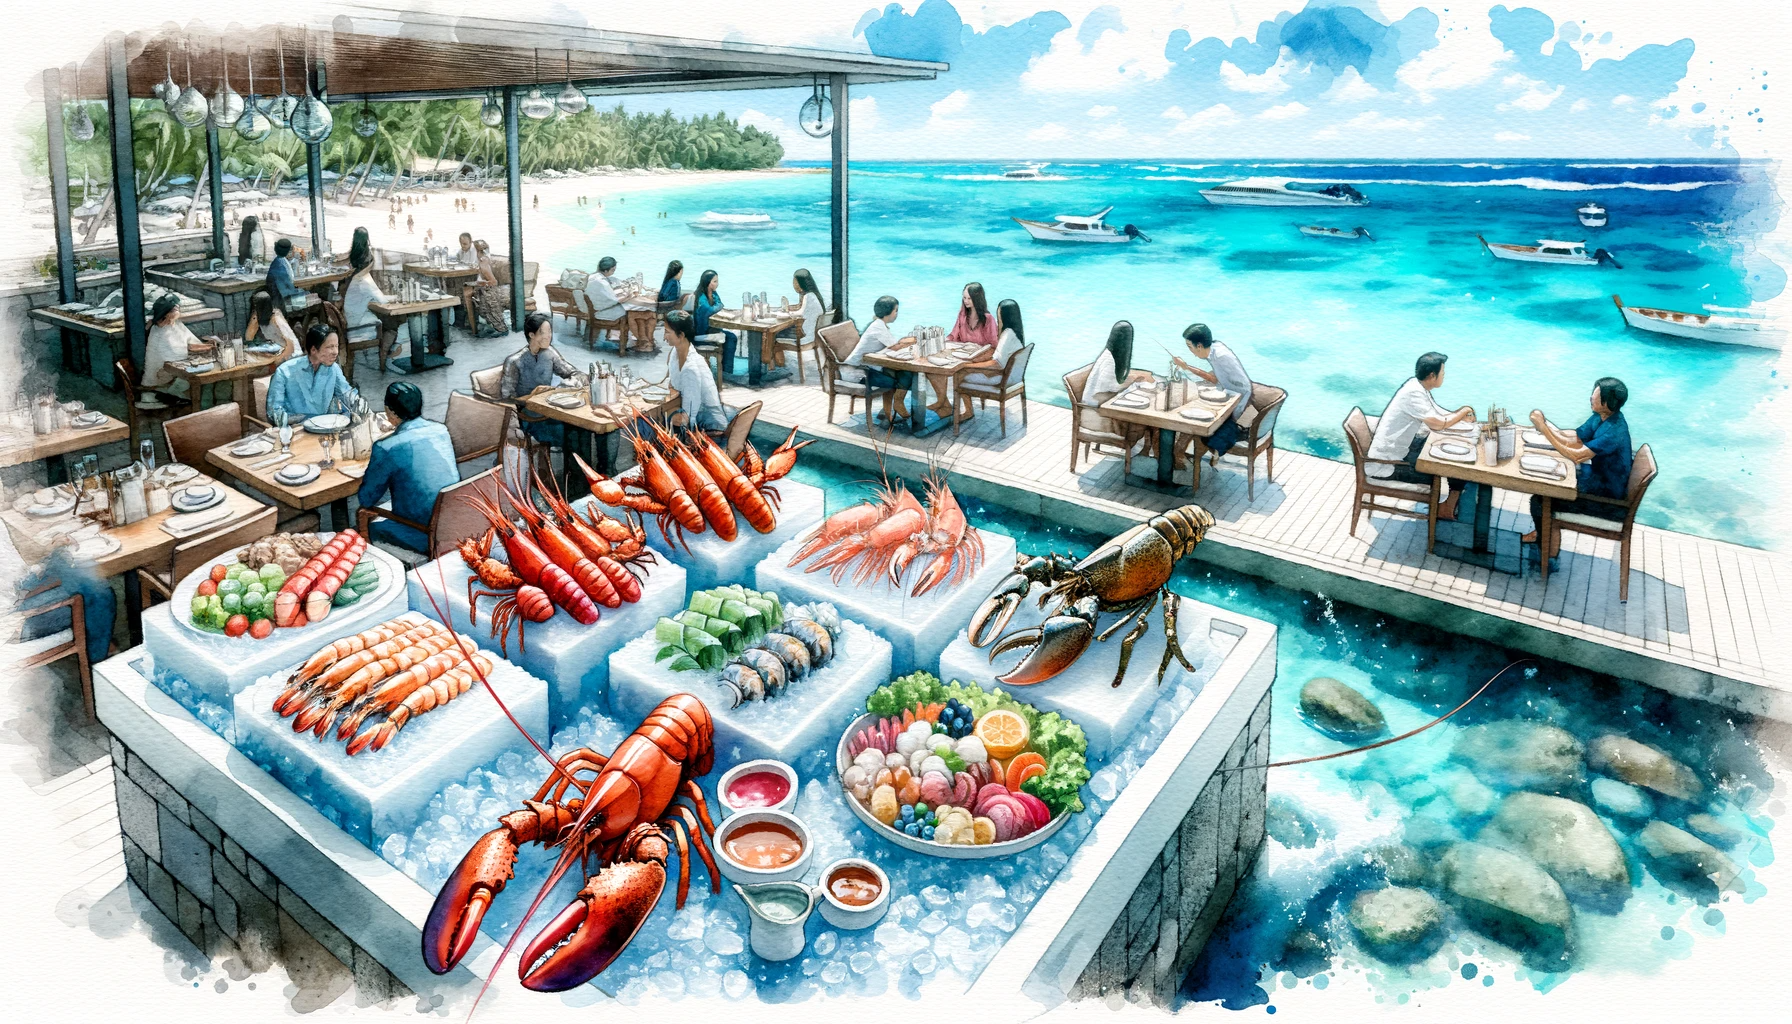 A Seafood Lover’s Paradise: Fresh Catches at 7 Restaurant